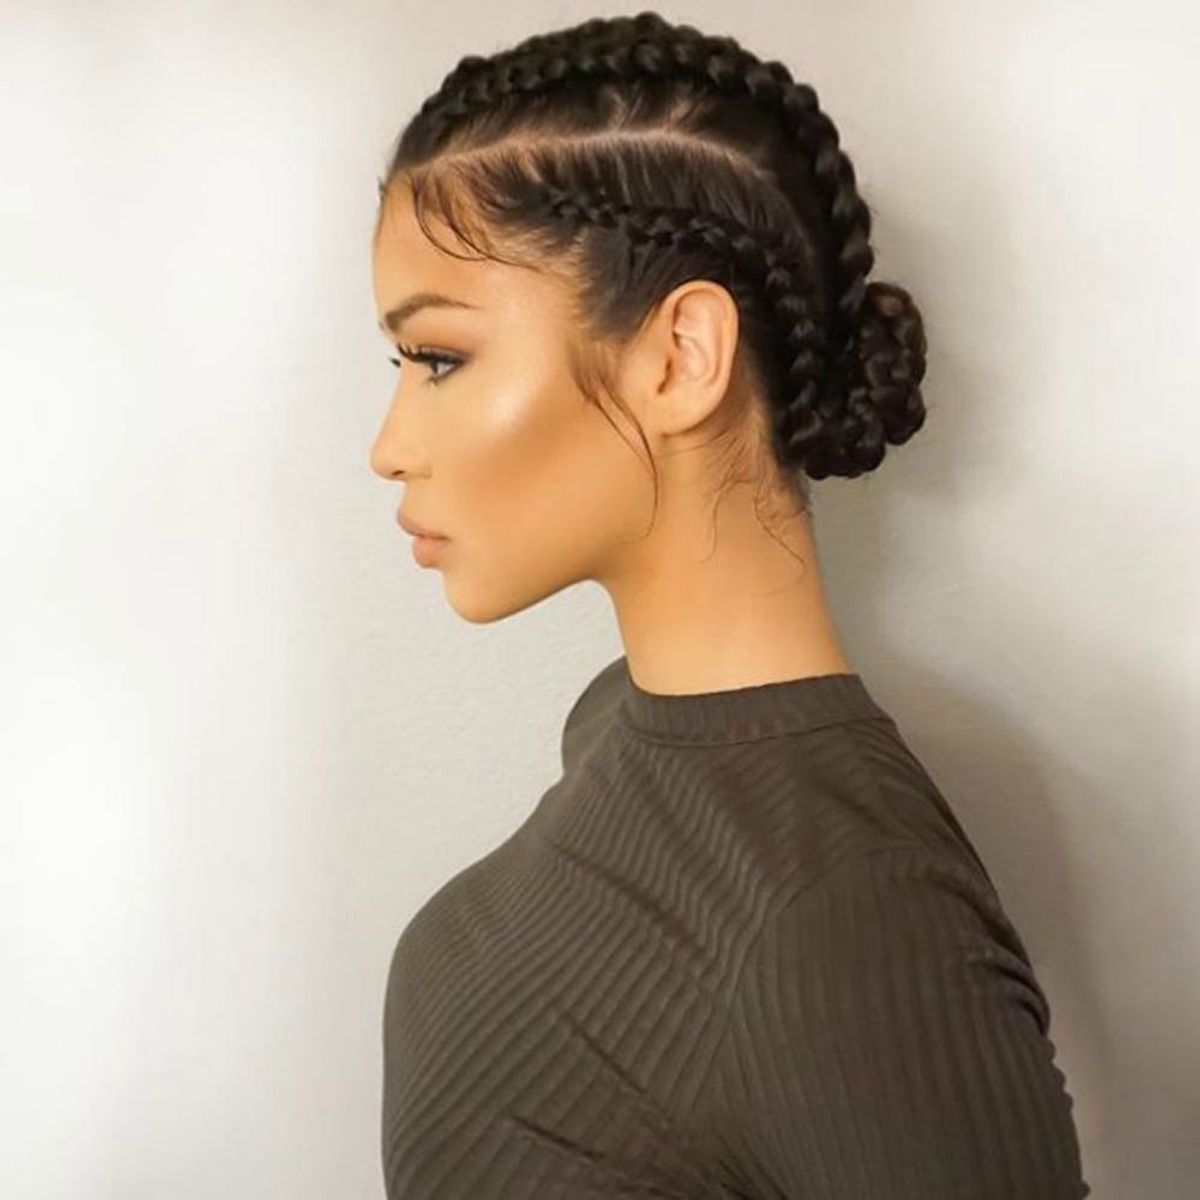 20 Braided Updos That Are Fire for Fall